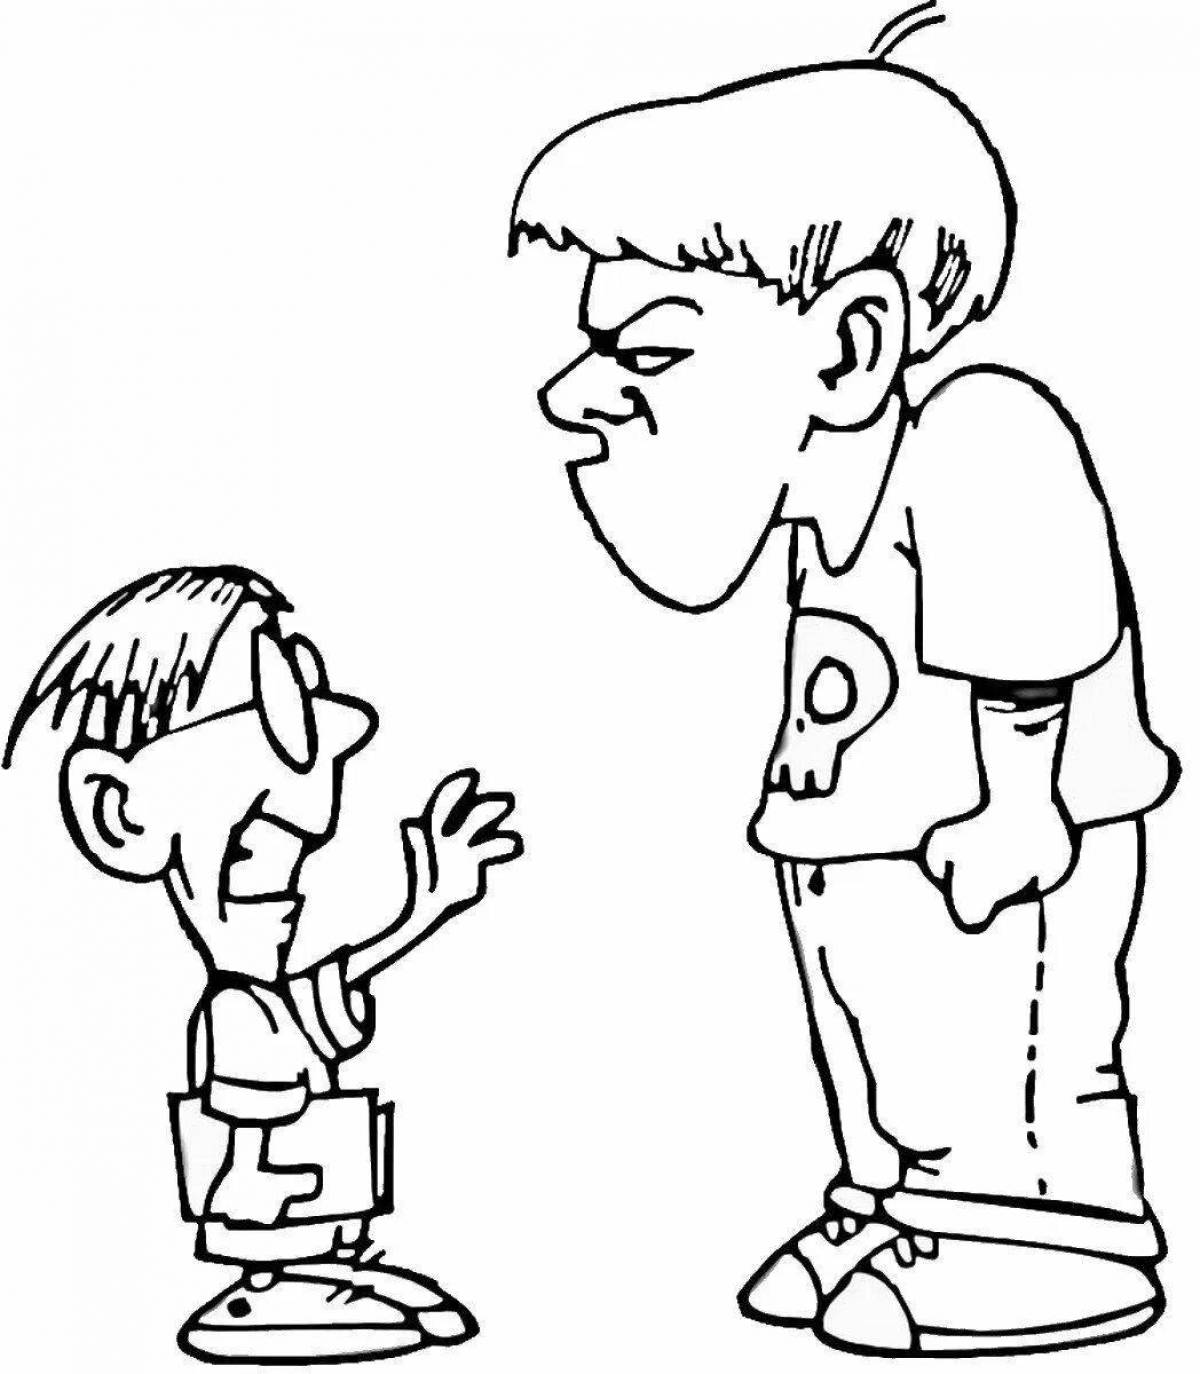 Playful stop bullying coloring page